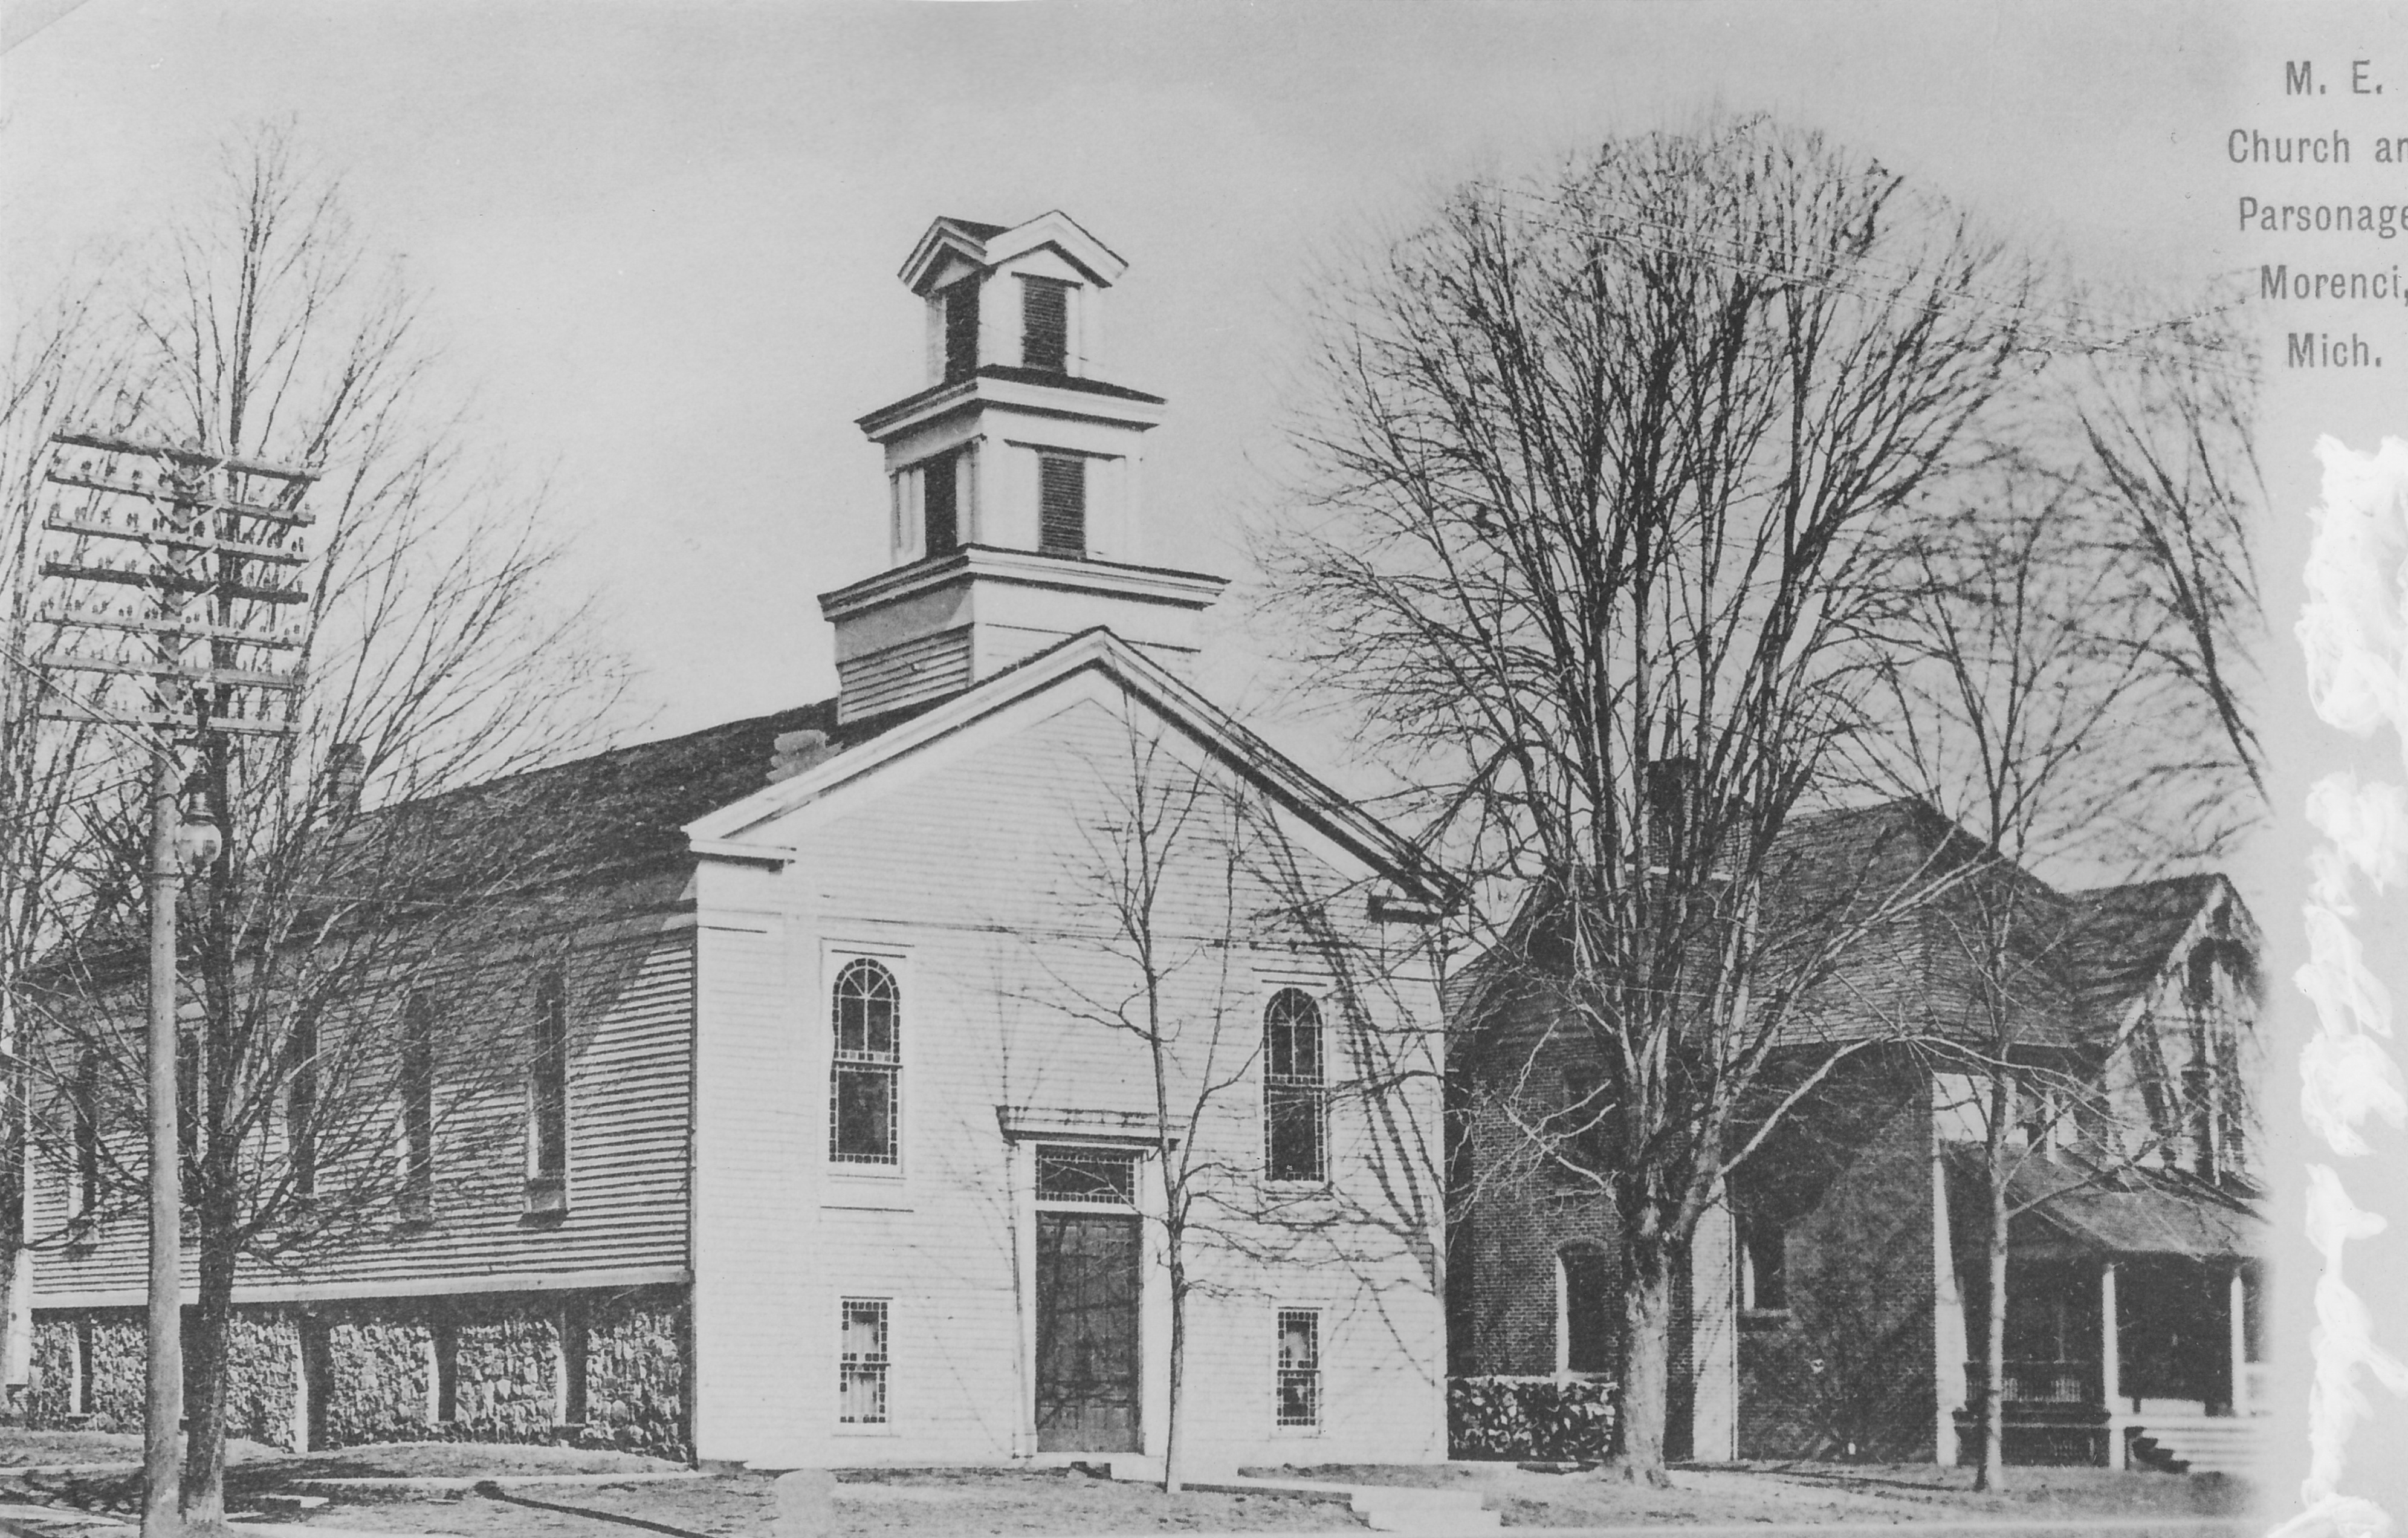 Early Methodist Episcopal Church and parsonage taken between 1908 and 1914.  Church erected in 1852, parsonage built in 1902.